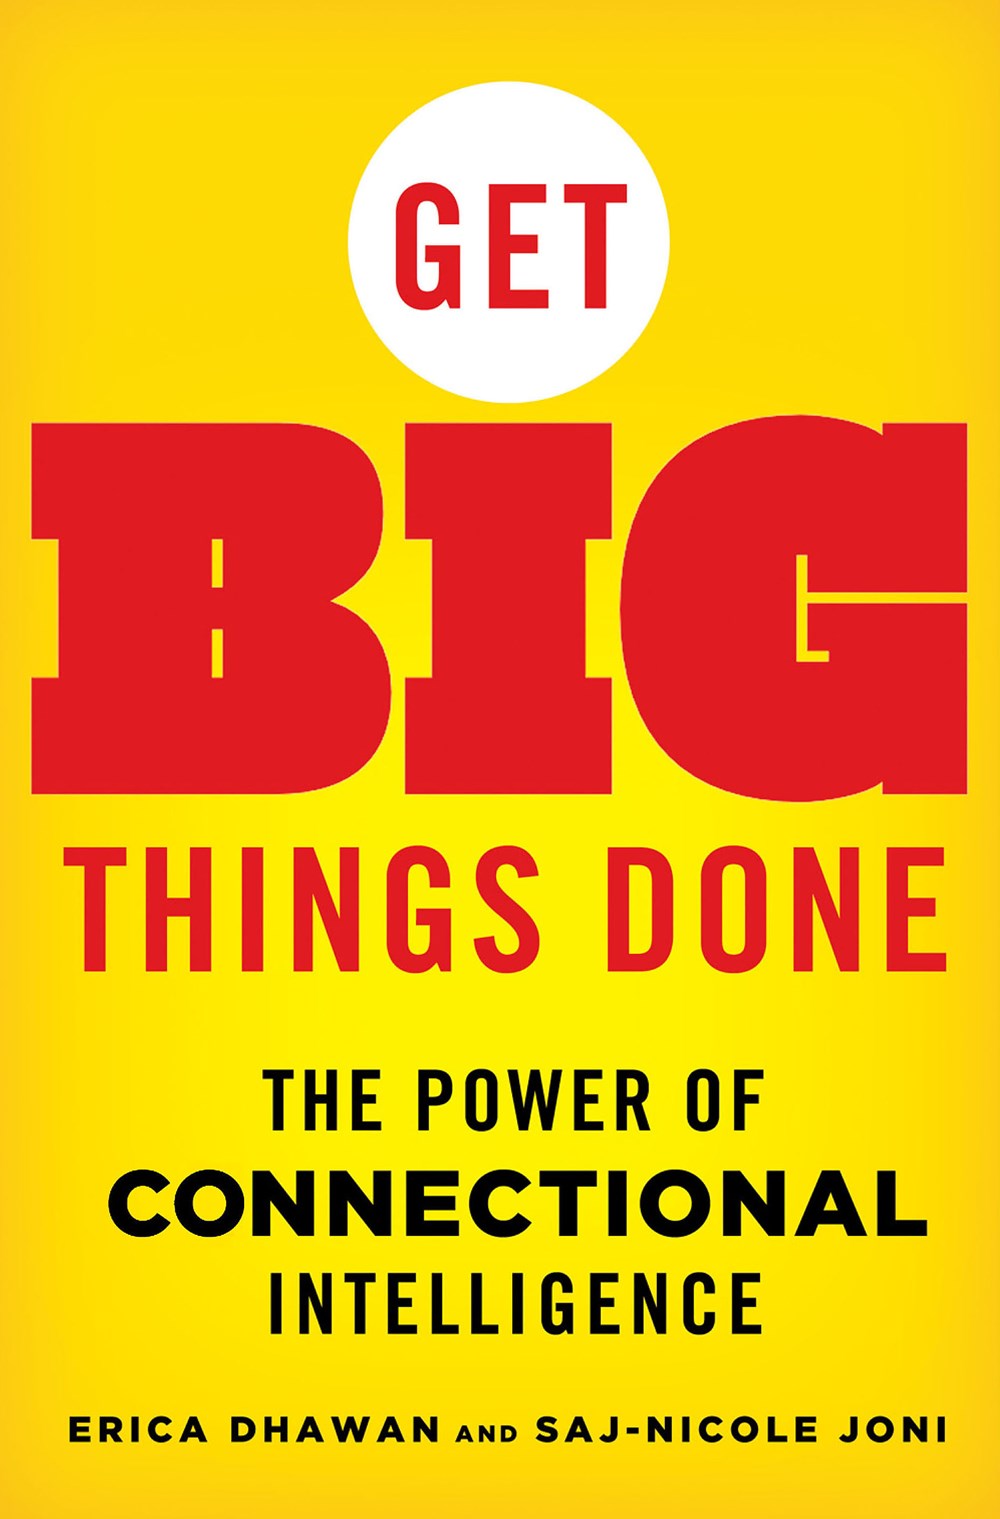 Get Big Things Done The Power of Connectional Intelligence